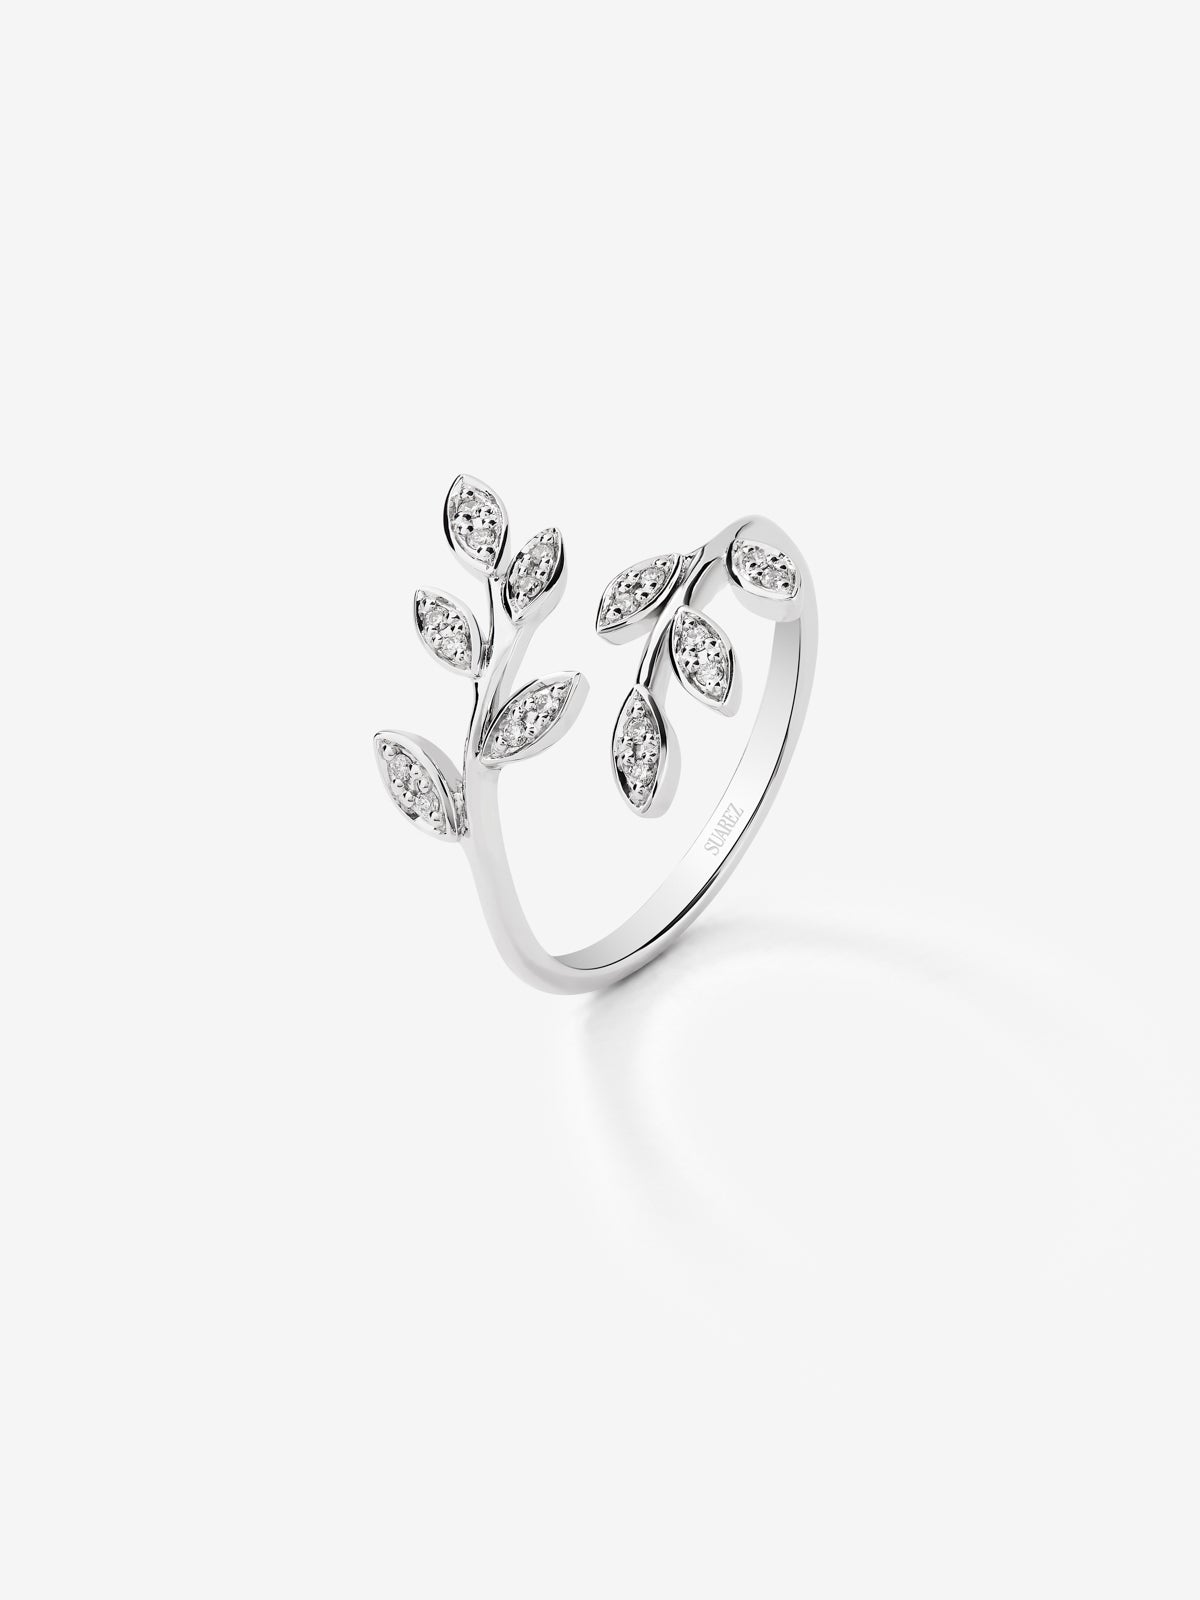 18K White Gold Leaf Ring with Pave Diamond